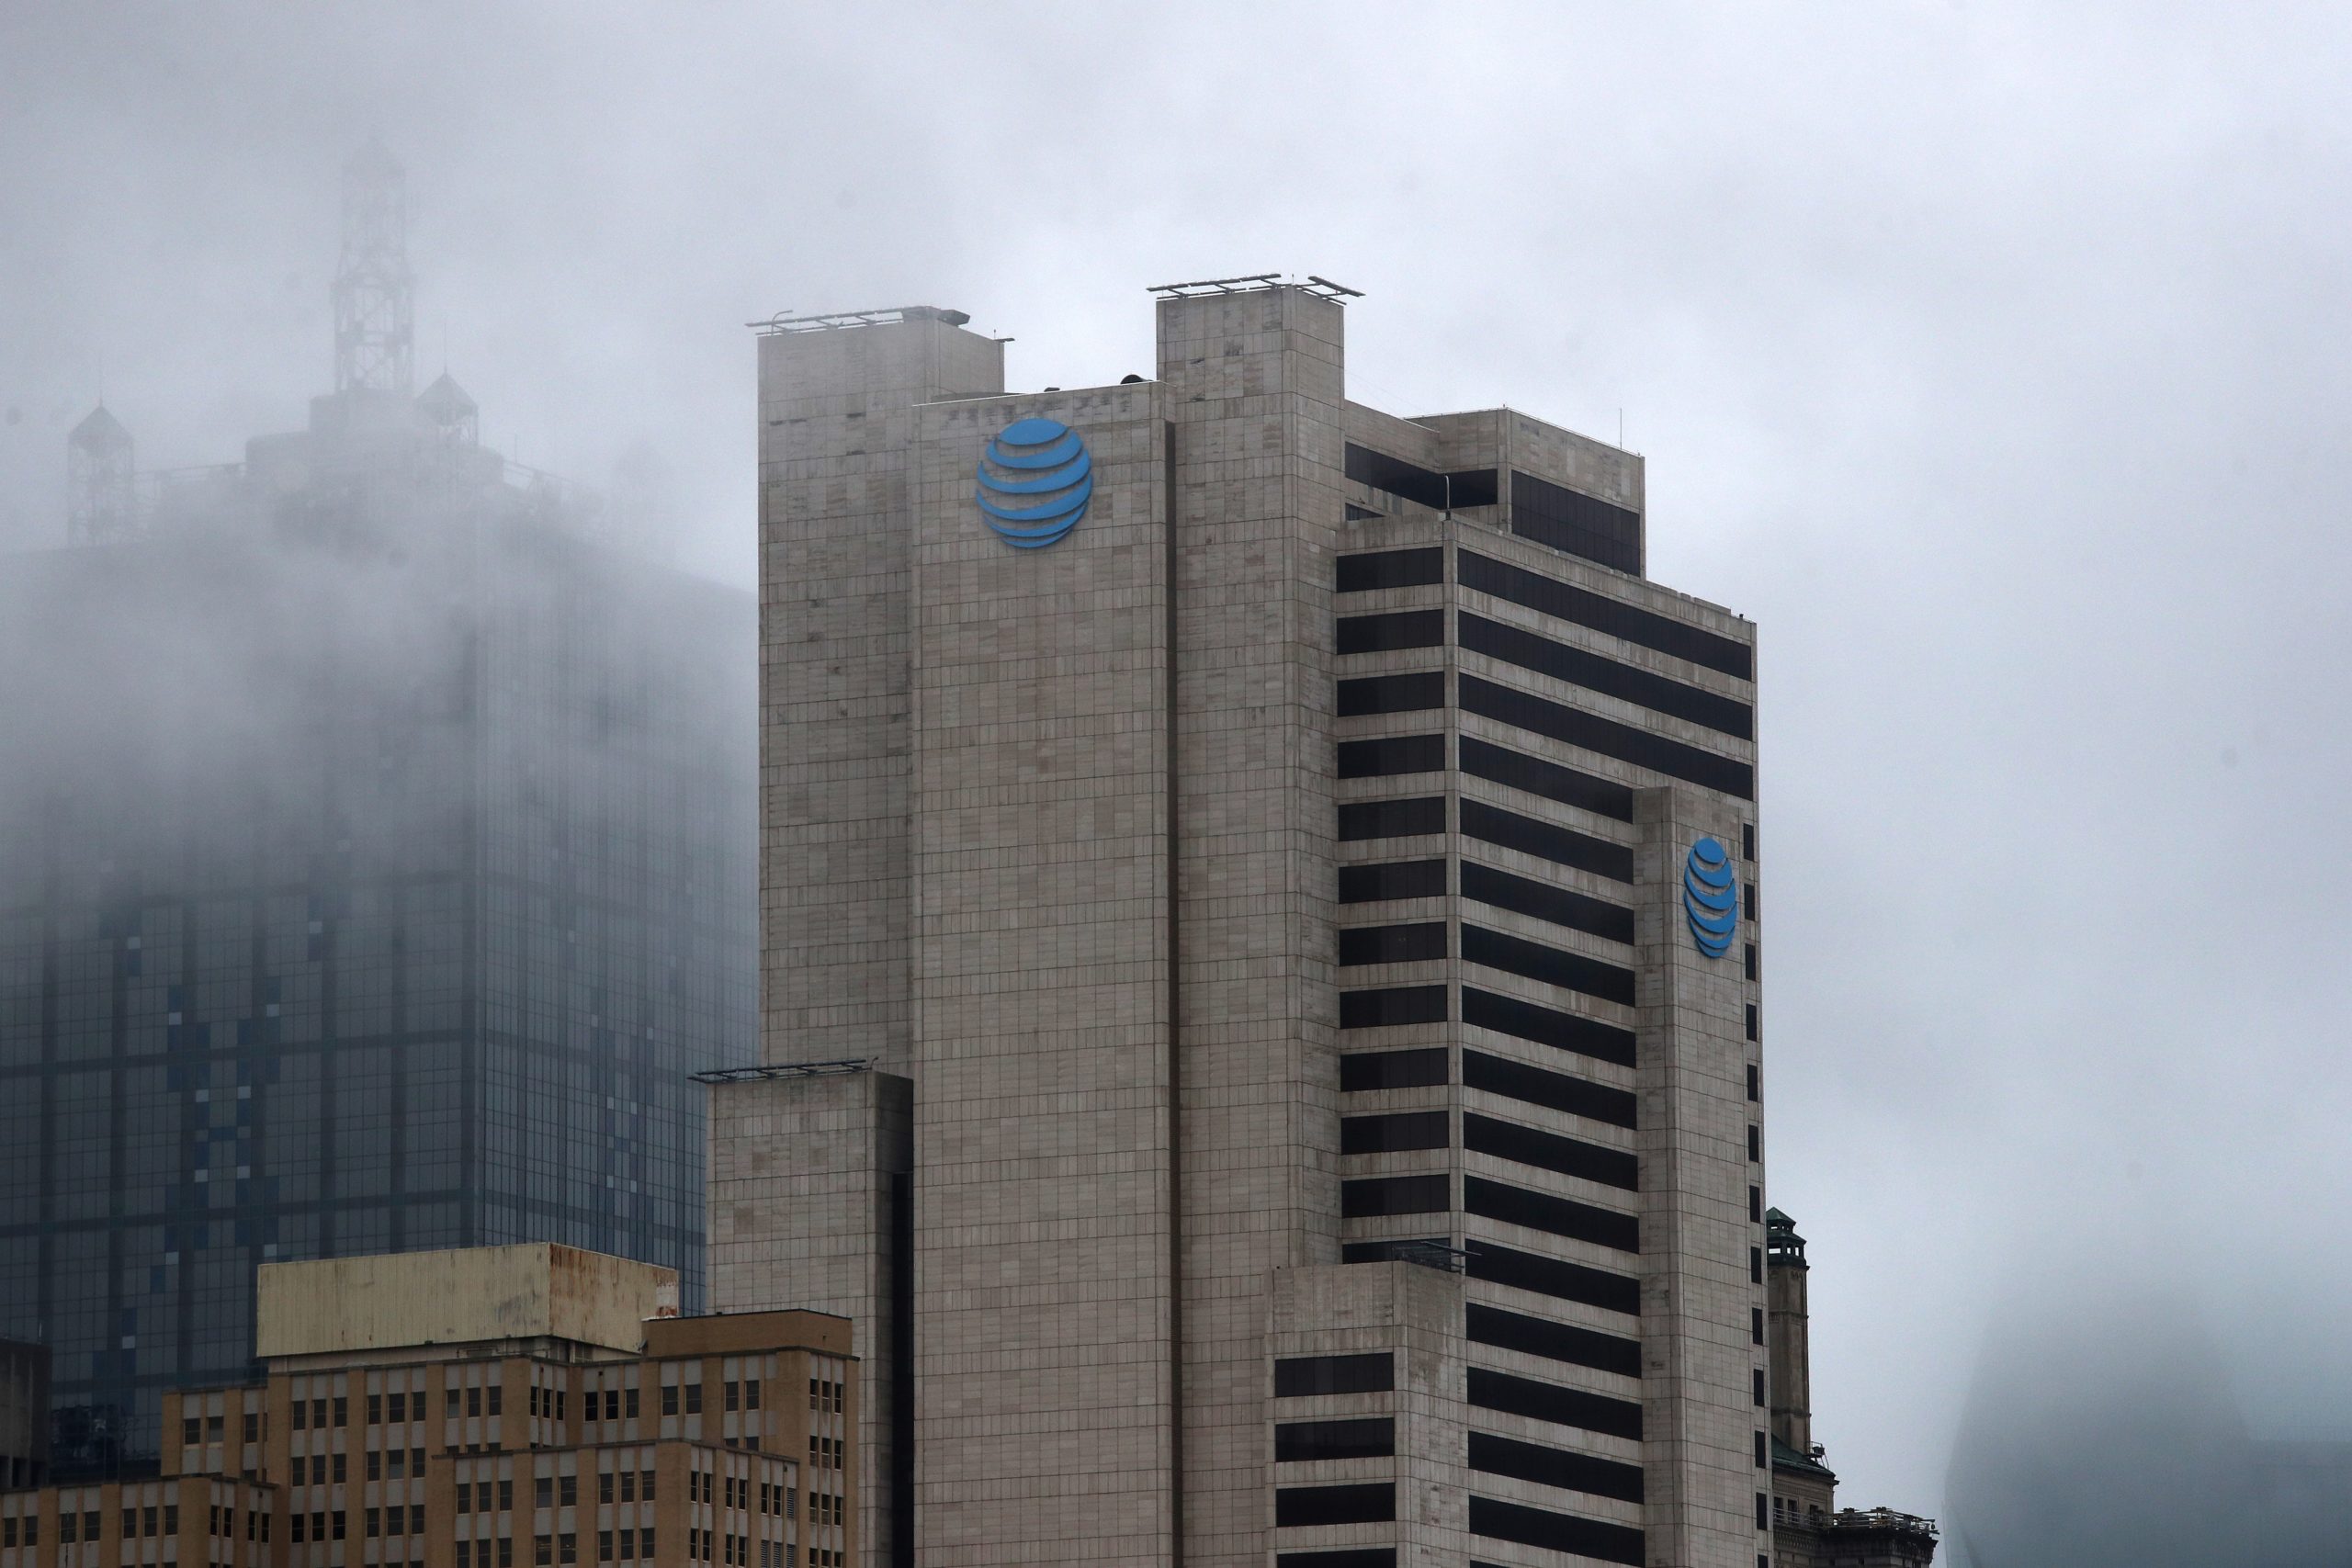 DALLAS, TEXAS - MARCH 13:  An exterior view of AT&T corporate headquarters on March 13, 2020 in Dallas, Texas.  AT&T is allowing employees to work remotely from home if they have the ability to do so, as a safety measure due to COVID-19. (Photo by Ronald Martinez/Getty Images)